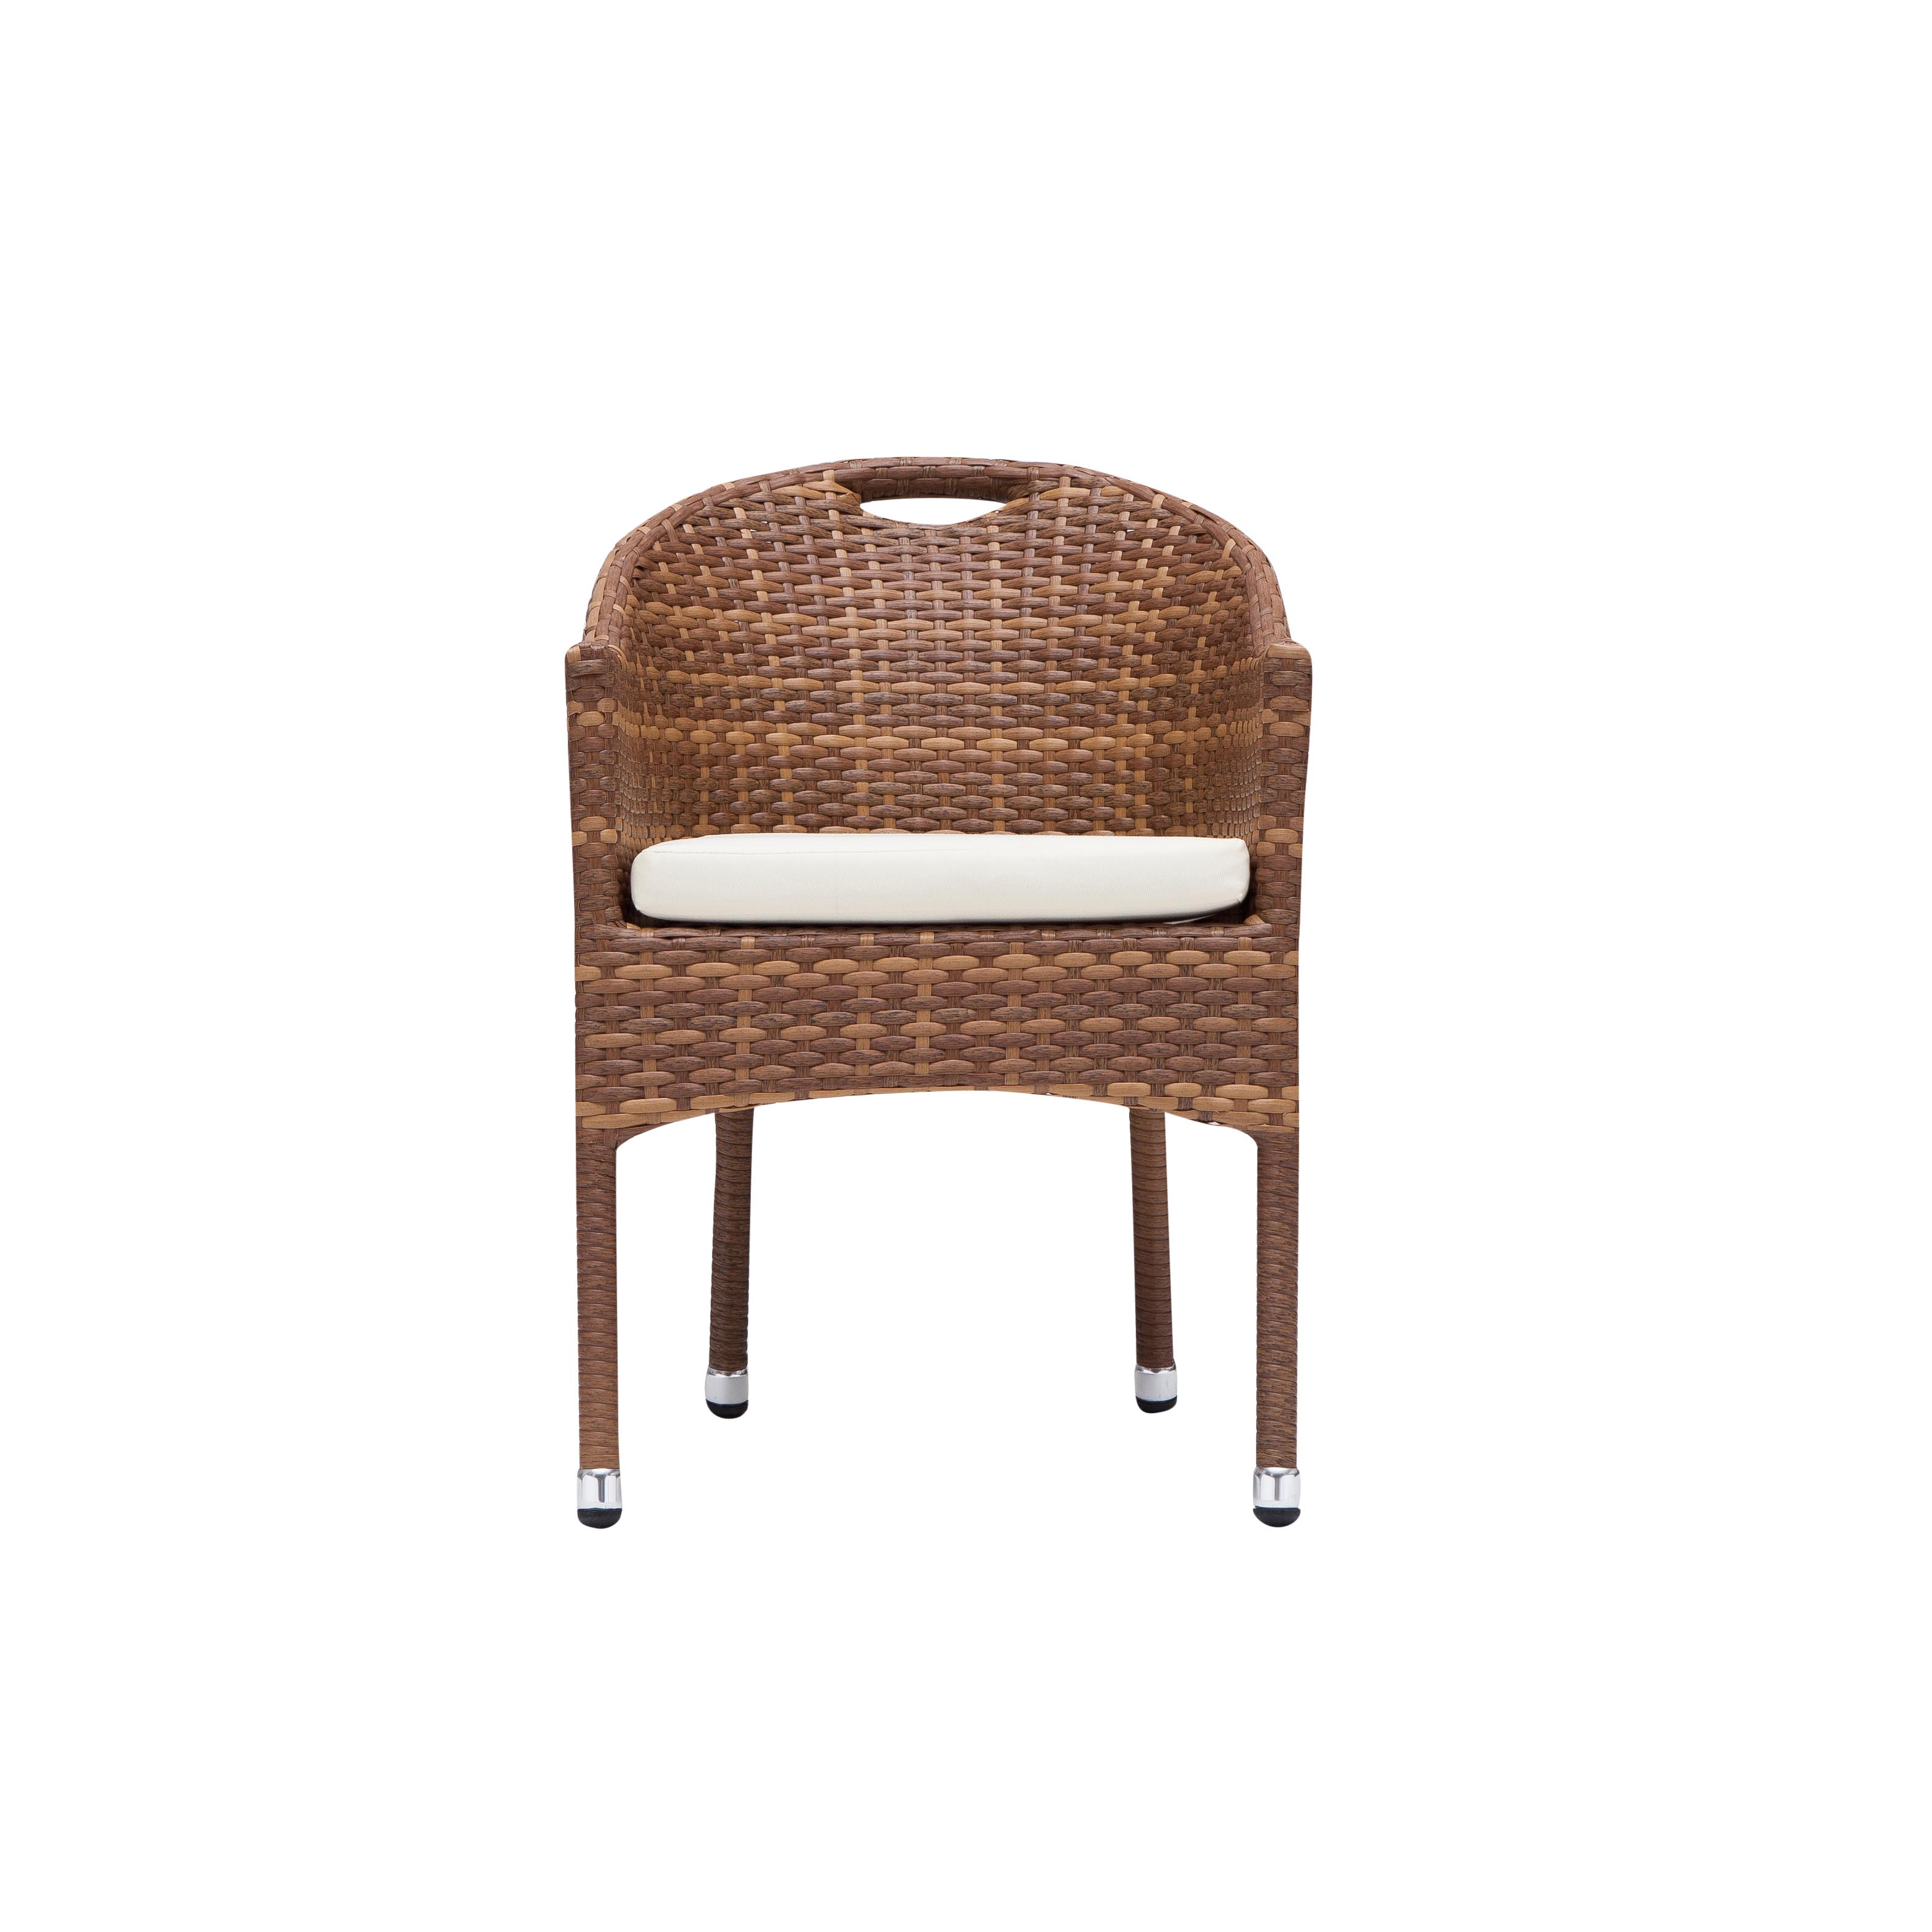 Angus dining chair S2